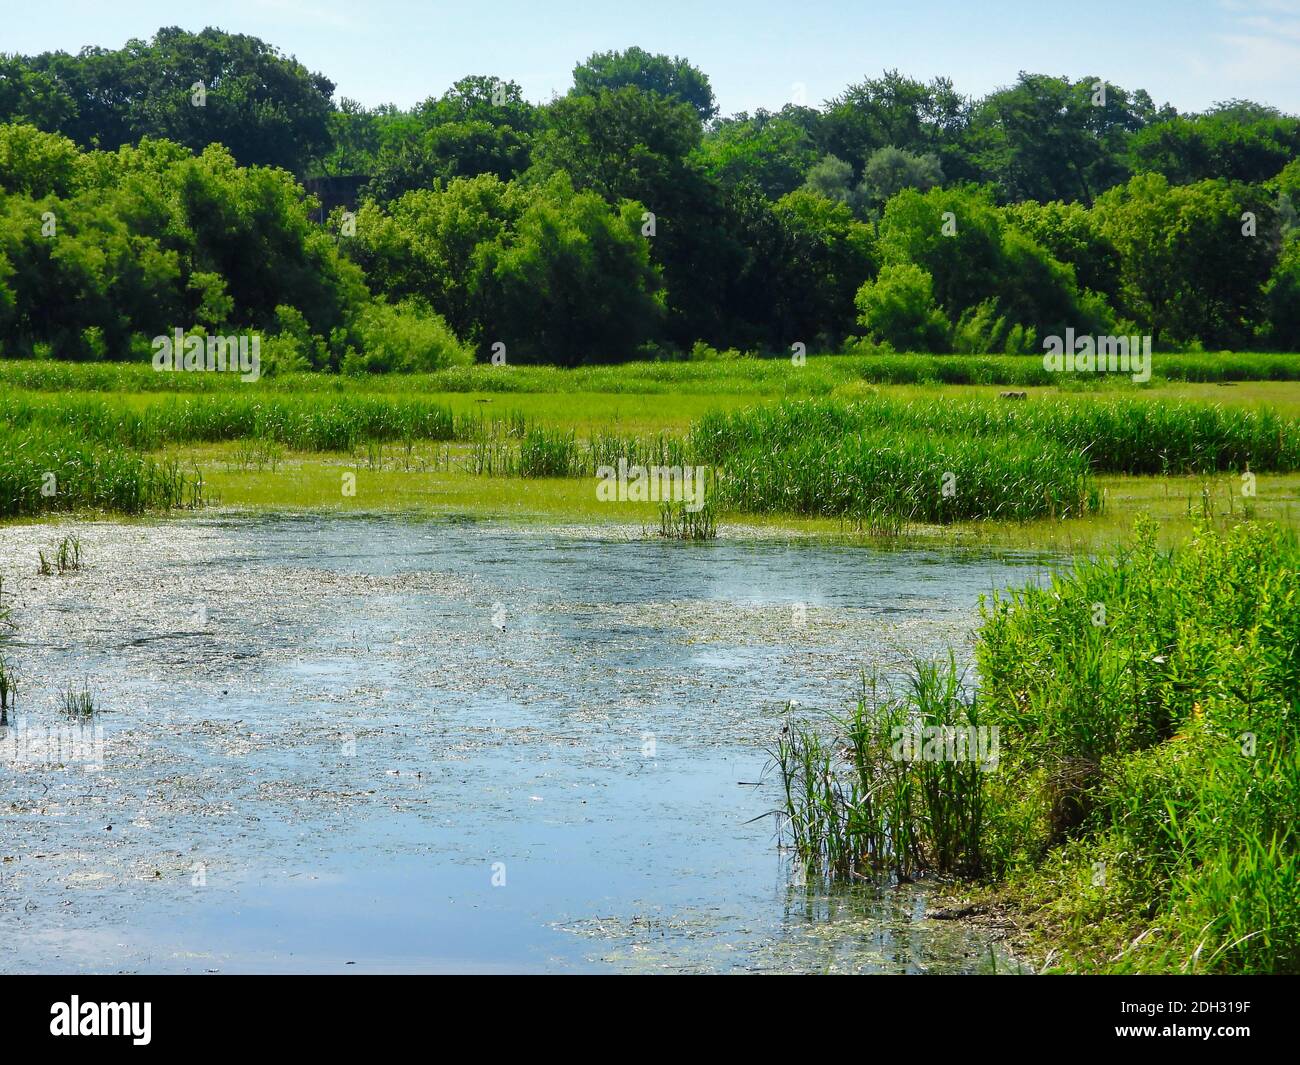 Wetland in a Clearing of the Forest in a Bright Summer Sunny Day with Lush Green Trees, Grass and Cattails circonding Water Shining from the Sunny Foto Stock